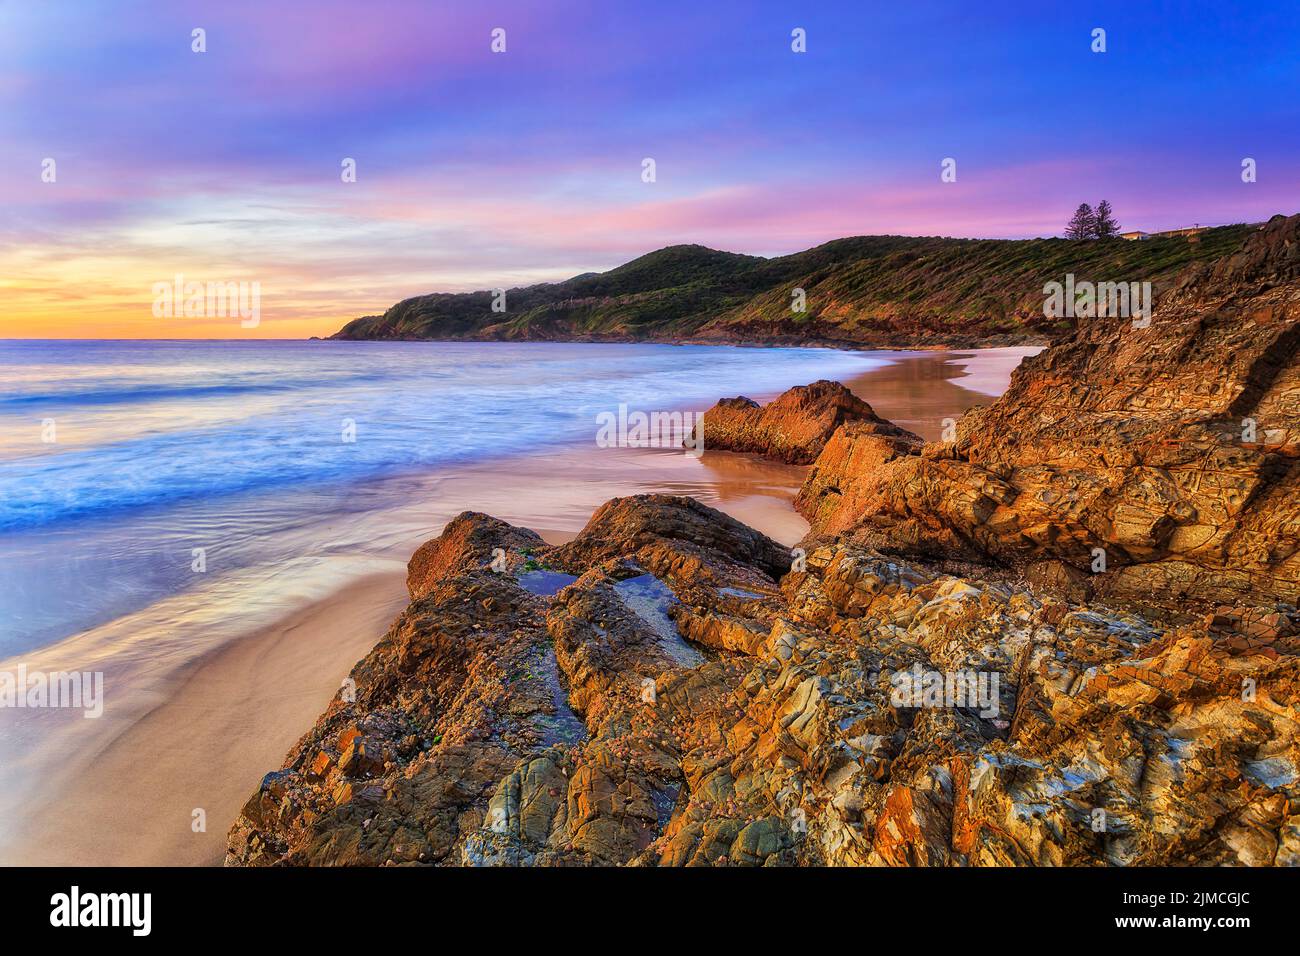 Hawke cape and headland from burgess beach in Forster town on Pacific coast of Australia at scenic seascape sunrise. Stock Photo